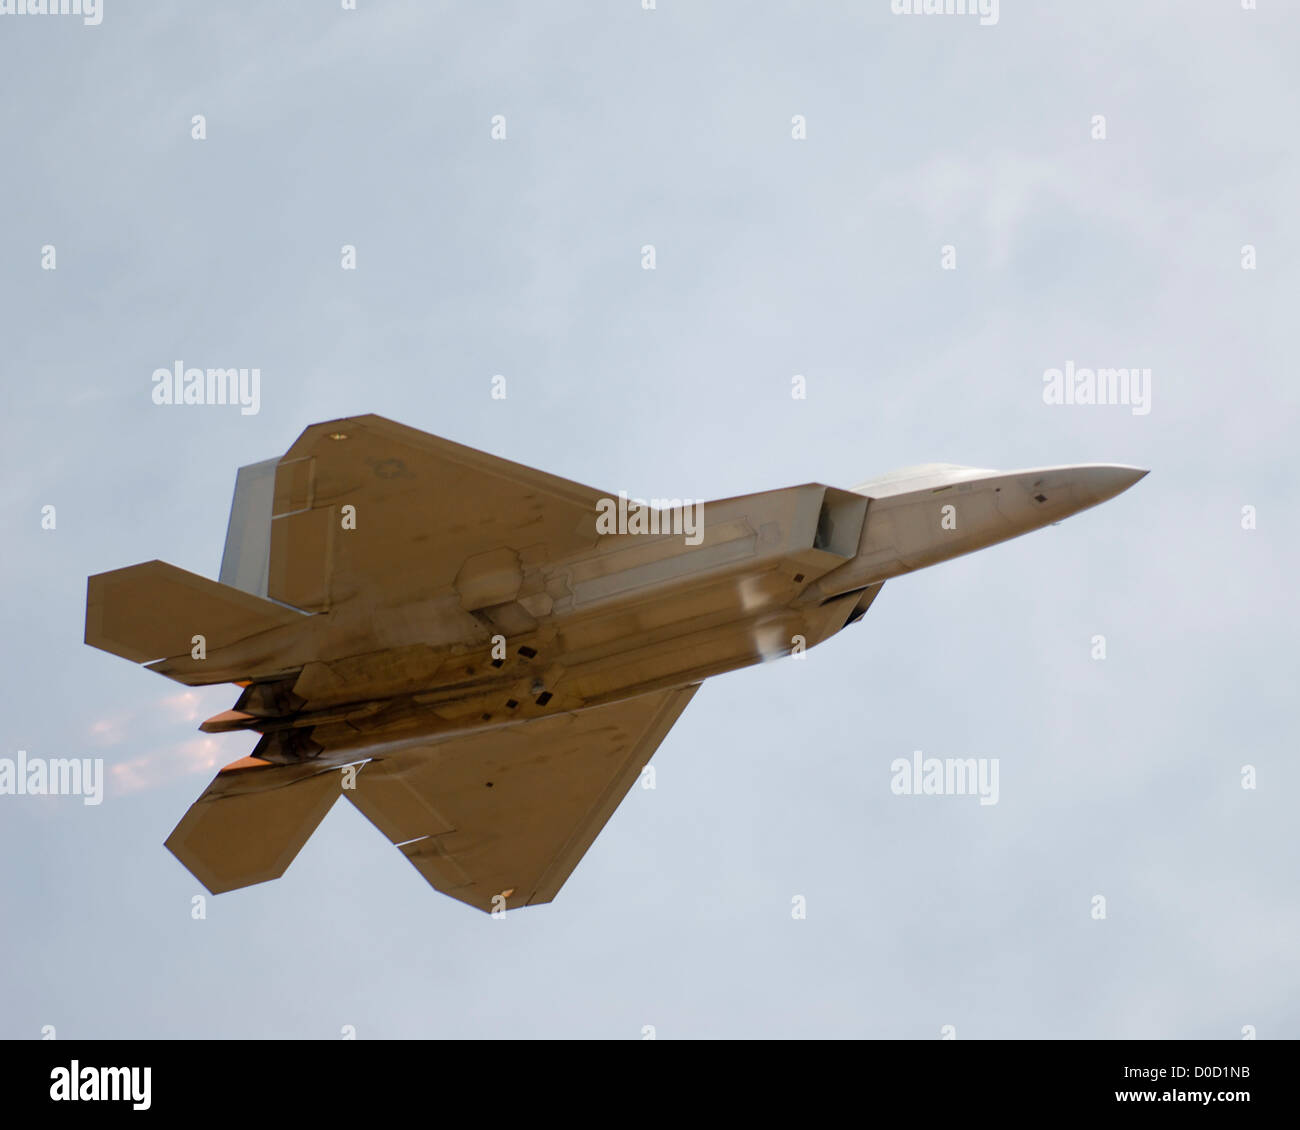 US Air Force F-22 Raptor Roars Through The Sky Under Full Afterburner Stock Photo